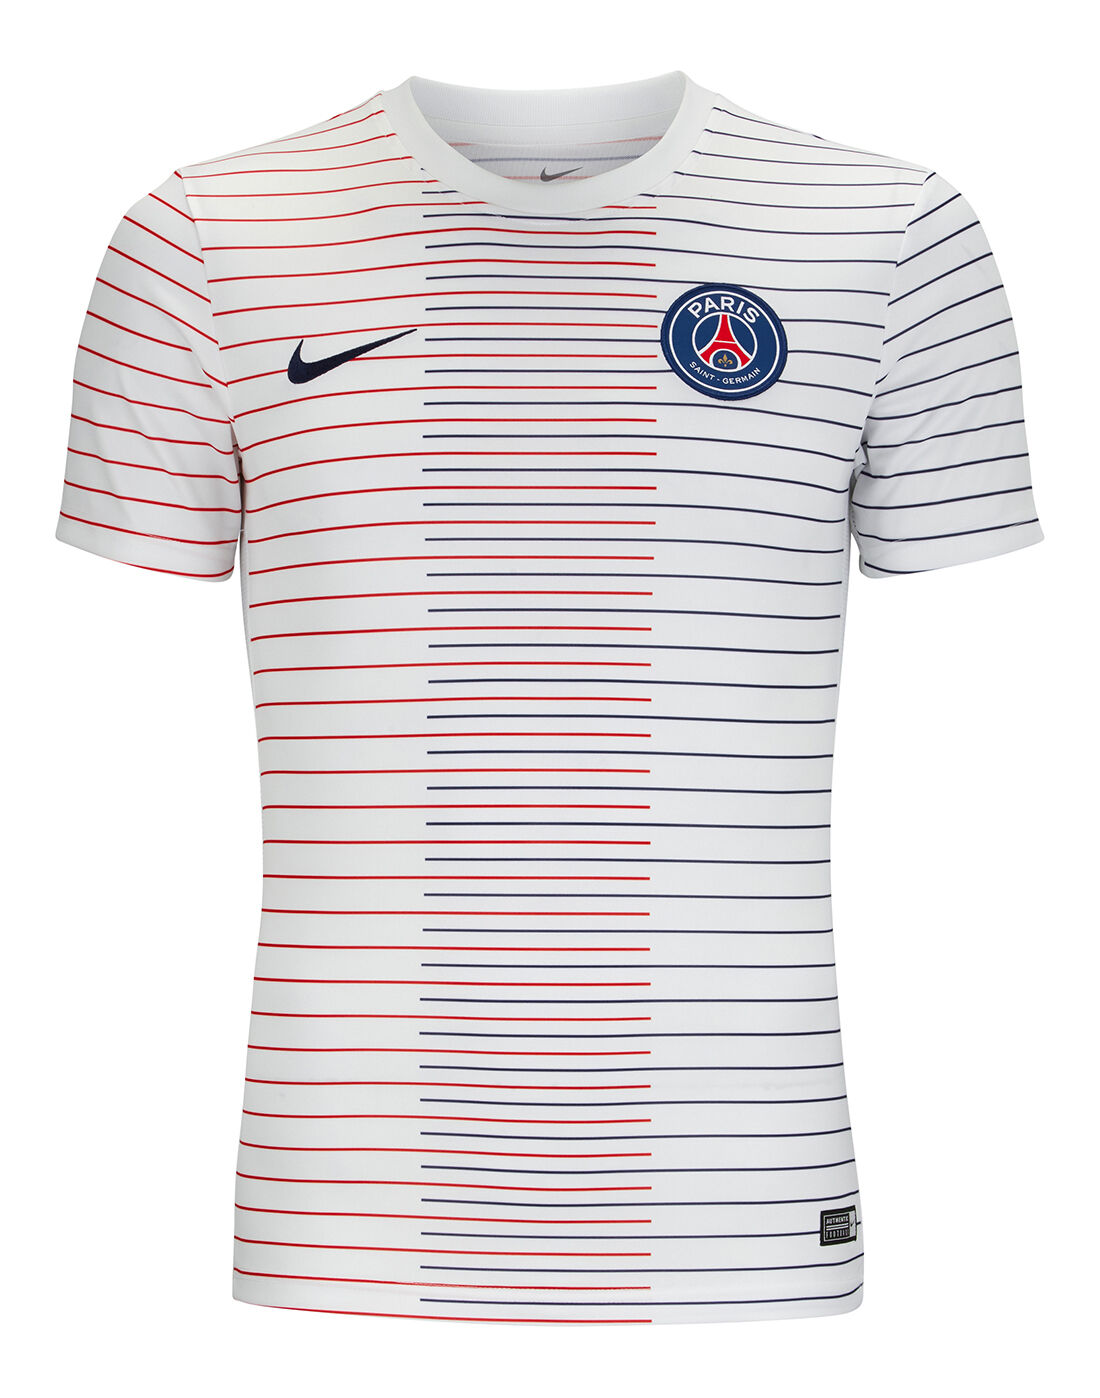 psg pre game jersey